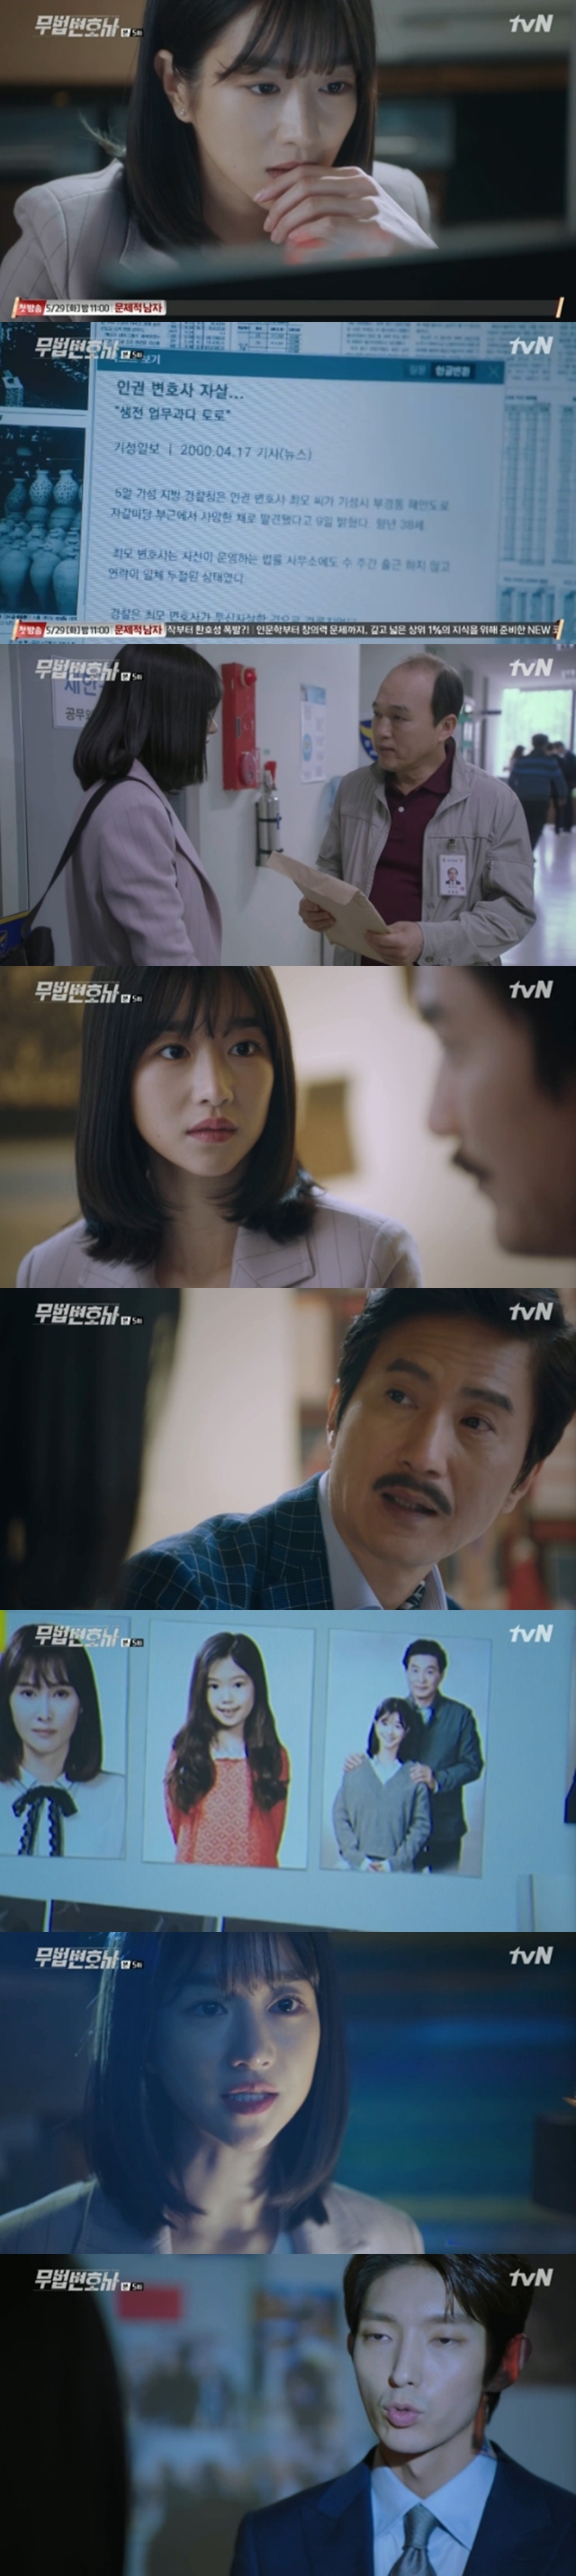 Seo Ye-ji finally knew the truth: Lee Joon-gi was involved in her mothers disappearance, and all found out it was because of Lee Hye-Yeong.In the fifth episode of TVNs new weekend drama, Lawless Lawyer (playplayed by Yoon Hyun-ho/director Kim Jin-min/production studio Dragon Rogosfilm), which aired on May 26, Ha Jae-yi was shown questioning and digging into Bong Sang-pil (Lee Joon-gi) and Cha Moon-sook (Lee Hye-Yeong).Ha Jae-yi wondered about the relationship between Bong Sang-pil and Cha Moon-sook, who was most curious about the identity of Cha Moon-sook who had treated him like his mother.Woo Hyung-man explained to An Oh-ju (Choi Min-soo) that someone was giving orders, explaining that he is presumed to be Cha Moon-sook.I found out the decisive thing: I heard that the lawless firm office was a lawyers office in the past, and that Choi Jin-ae (Shin Eun-jung), who used the office, committed suicide over his son.When he found out that Choi Jin-aes death day and his mothers disappearance were the same, he visited the criminal factory head (Kim Kwang-gyu) and demanded the data of the case.As soon as the case was over, the original material disappeared. I was good at copying it, said the factory manager.For Heroes, the boss of For Heroes, who Bong Sang-pil had organized, also visited.For Heroes told me that he was Bong Sang-pils uncle and that it was his decision that Bong Sang-pil had returned to his old age.Is not the timing too exquisite to be a coincidence? Ha Jae-yi found out everything. I saw a picture of his childhood and his mother in Bong Sang-pils office.So he met Bong Sang-pil and pointed out that the office of the Lawless Lawyer firm was Choi Jin-aes office in the past, and the day Choi Jin-ae died was like his mothers disappearance.Why are my mom and I here? Tell me, the real reason youre here, he said.Bong Sang-pil said, An-oh killed my mother. In front of me. Right here. Cha Moon-sook, the man who told An-oh to kill her.And what happened to me and your mothers disappearance, all of it is Cha Mun-suks work. kim ye-eun